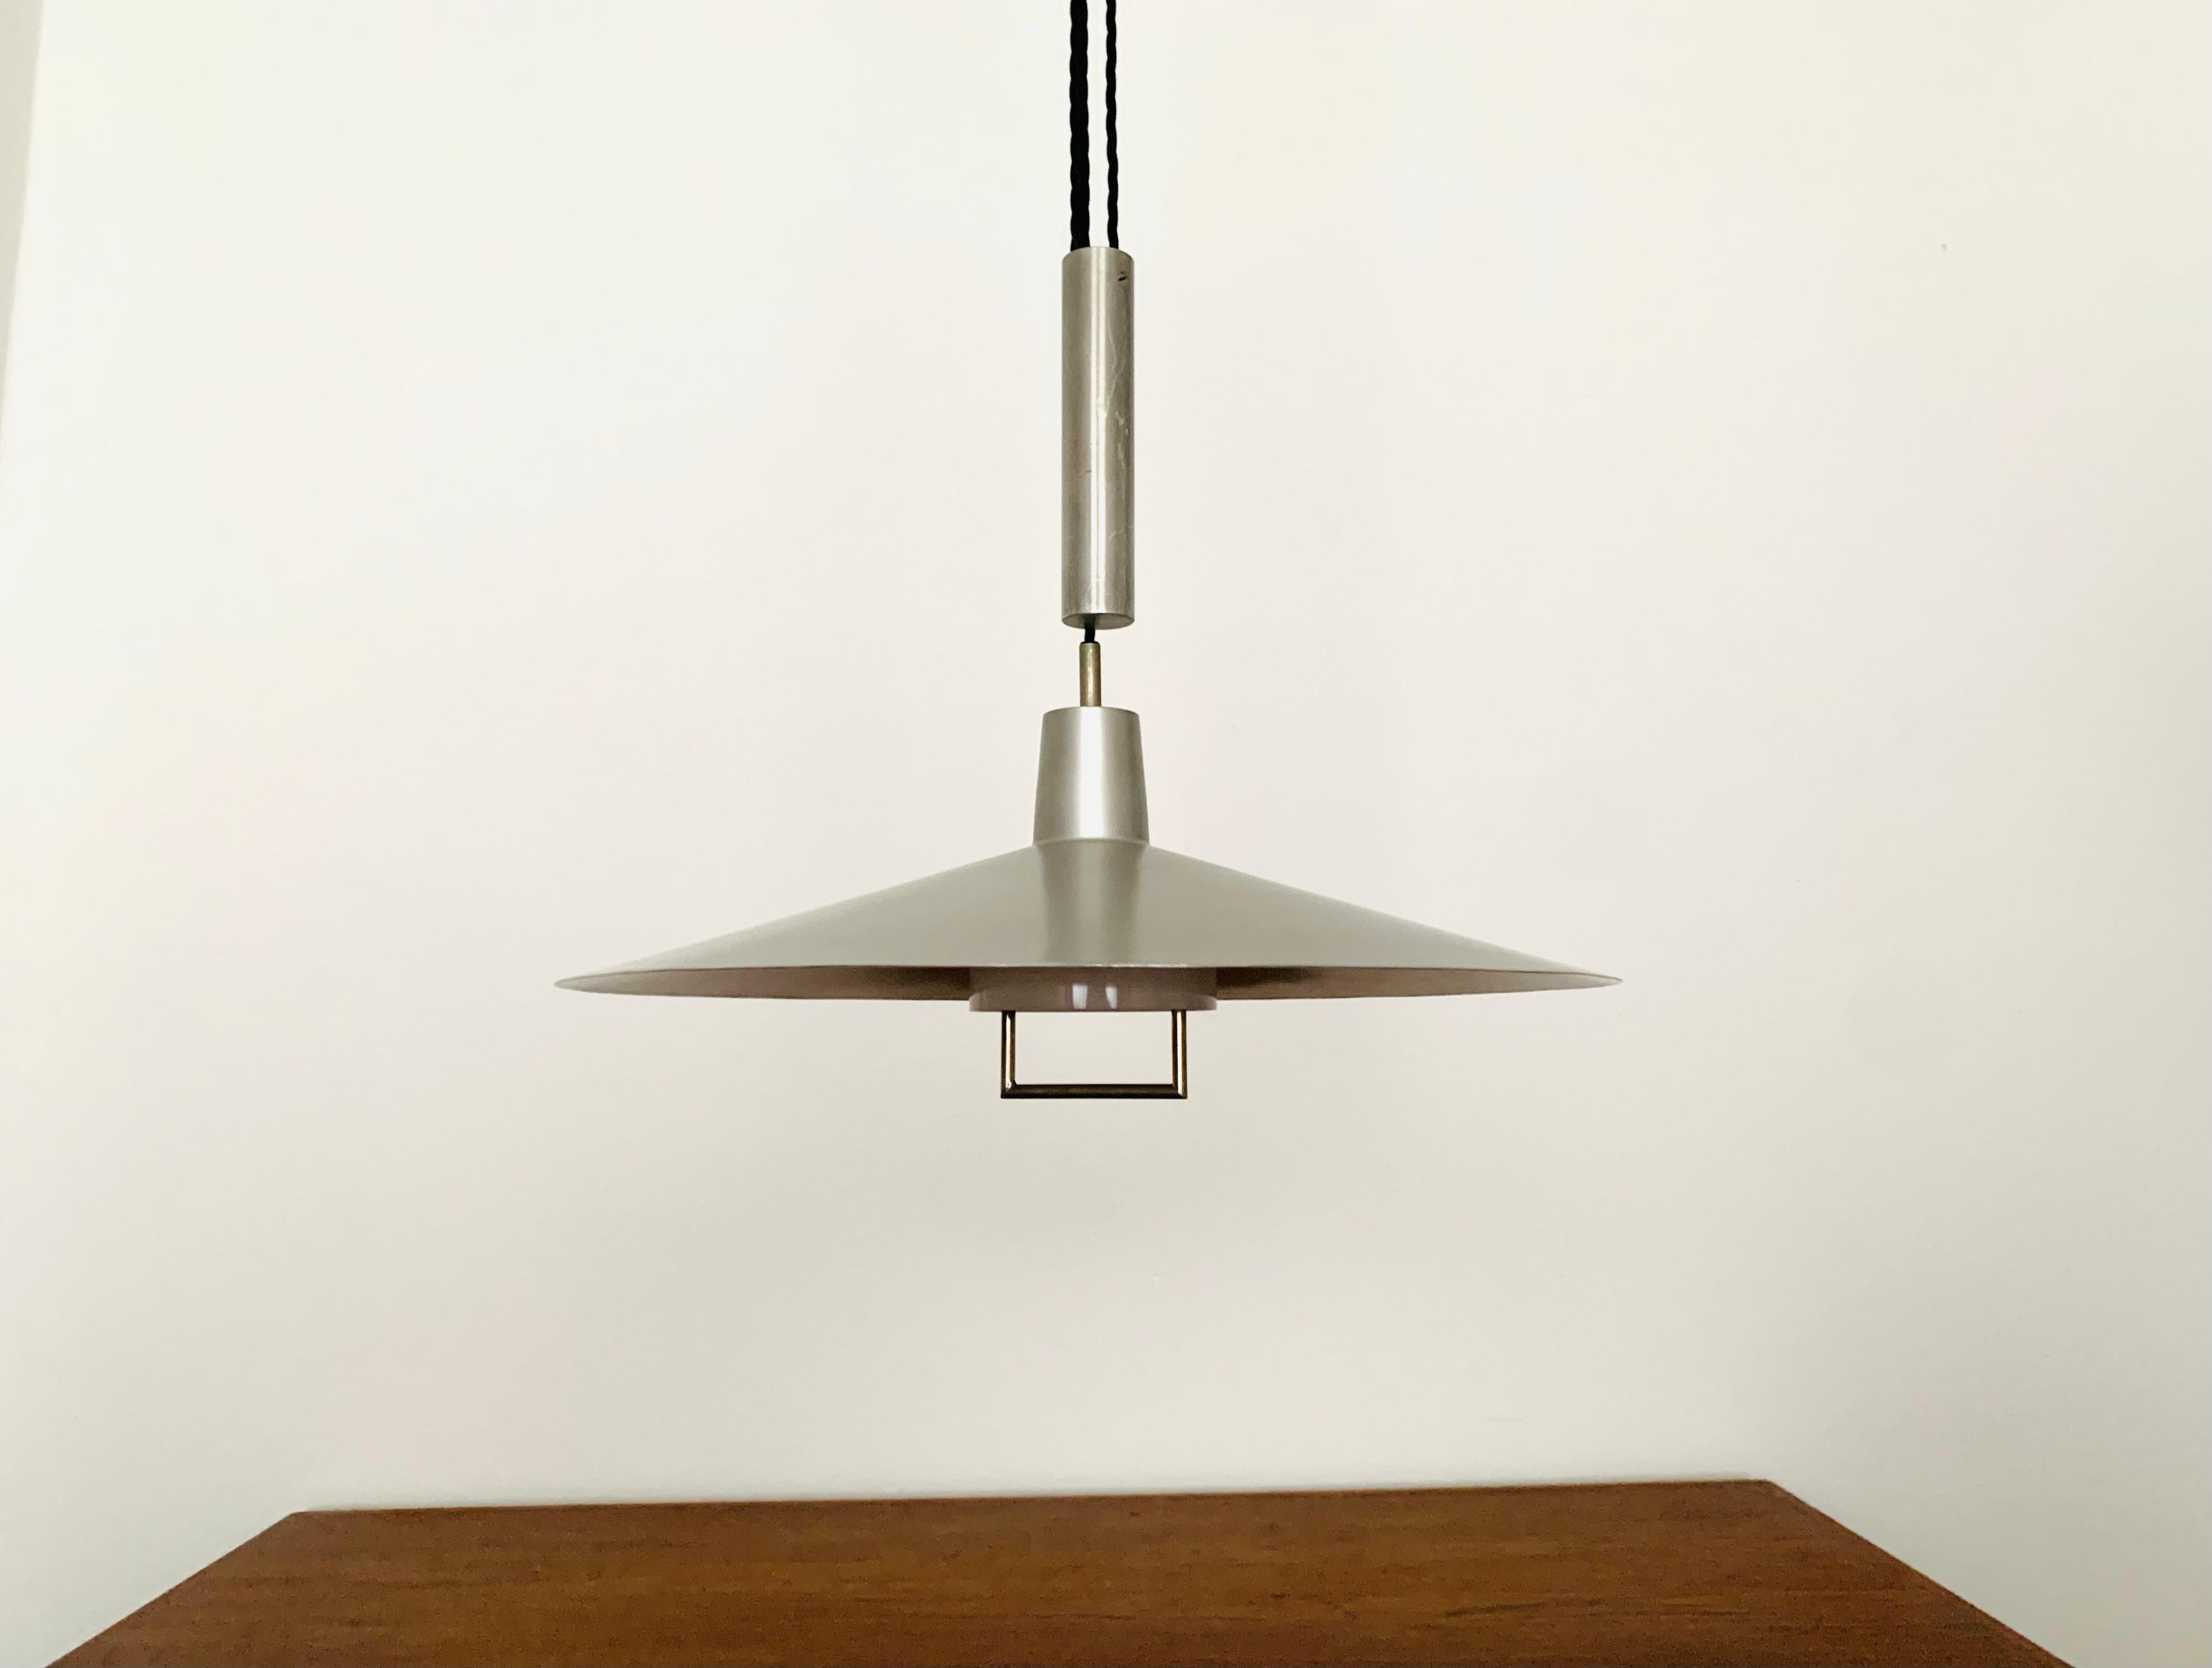 Adjustable Pendant Lamp with Counterweight In Good Condition For Sale In München, DE